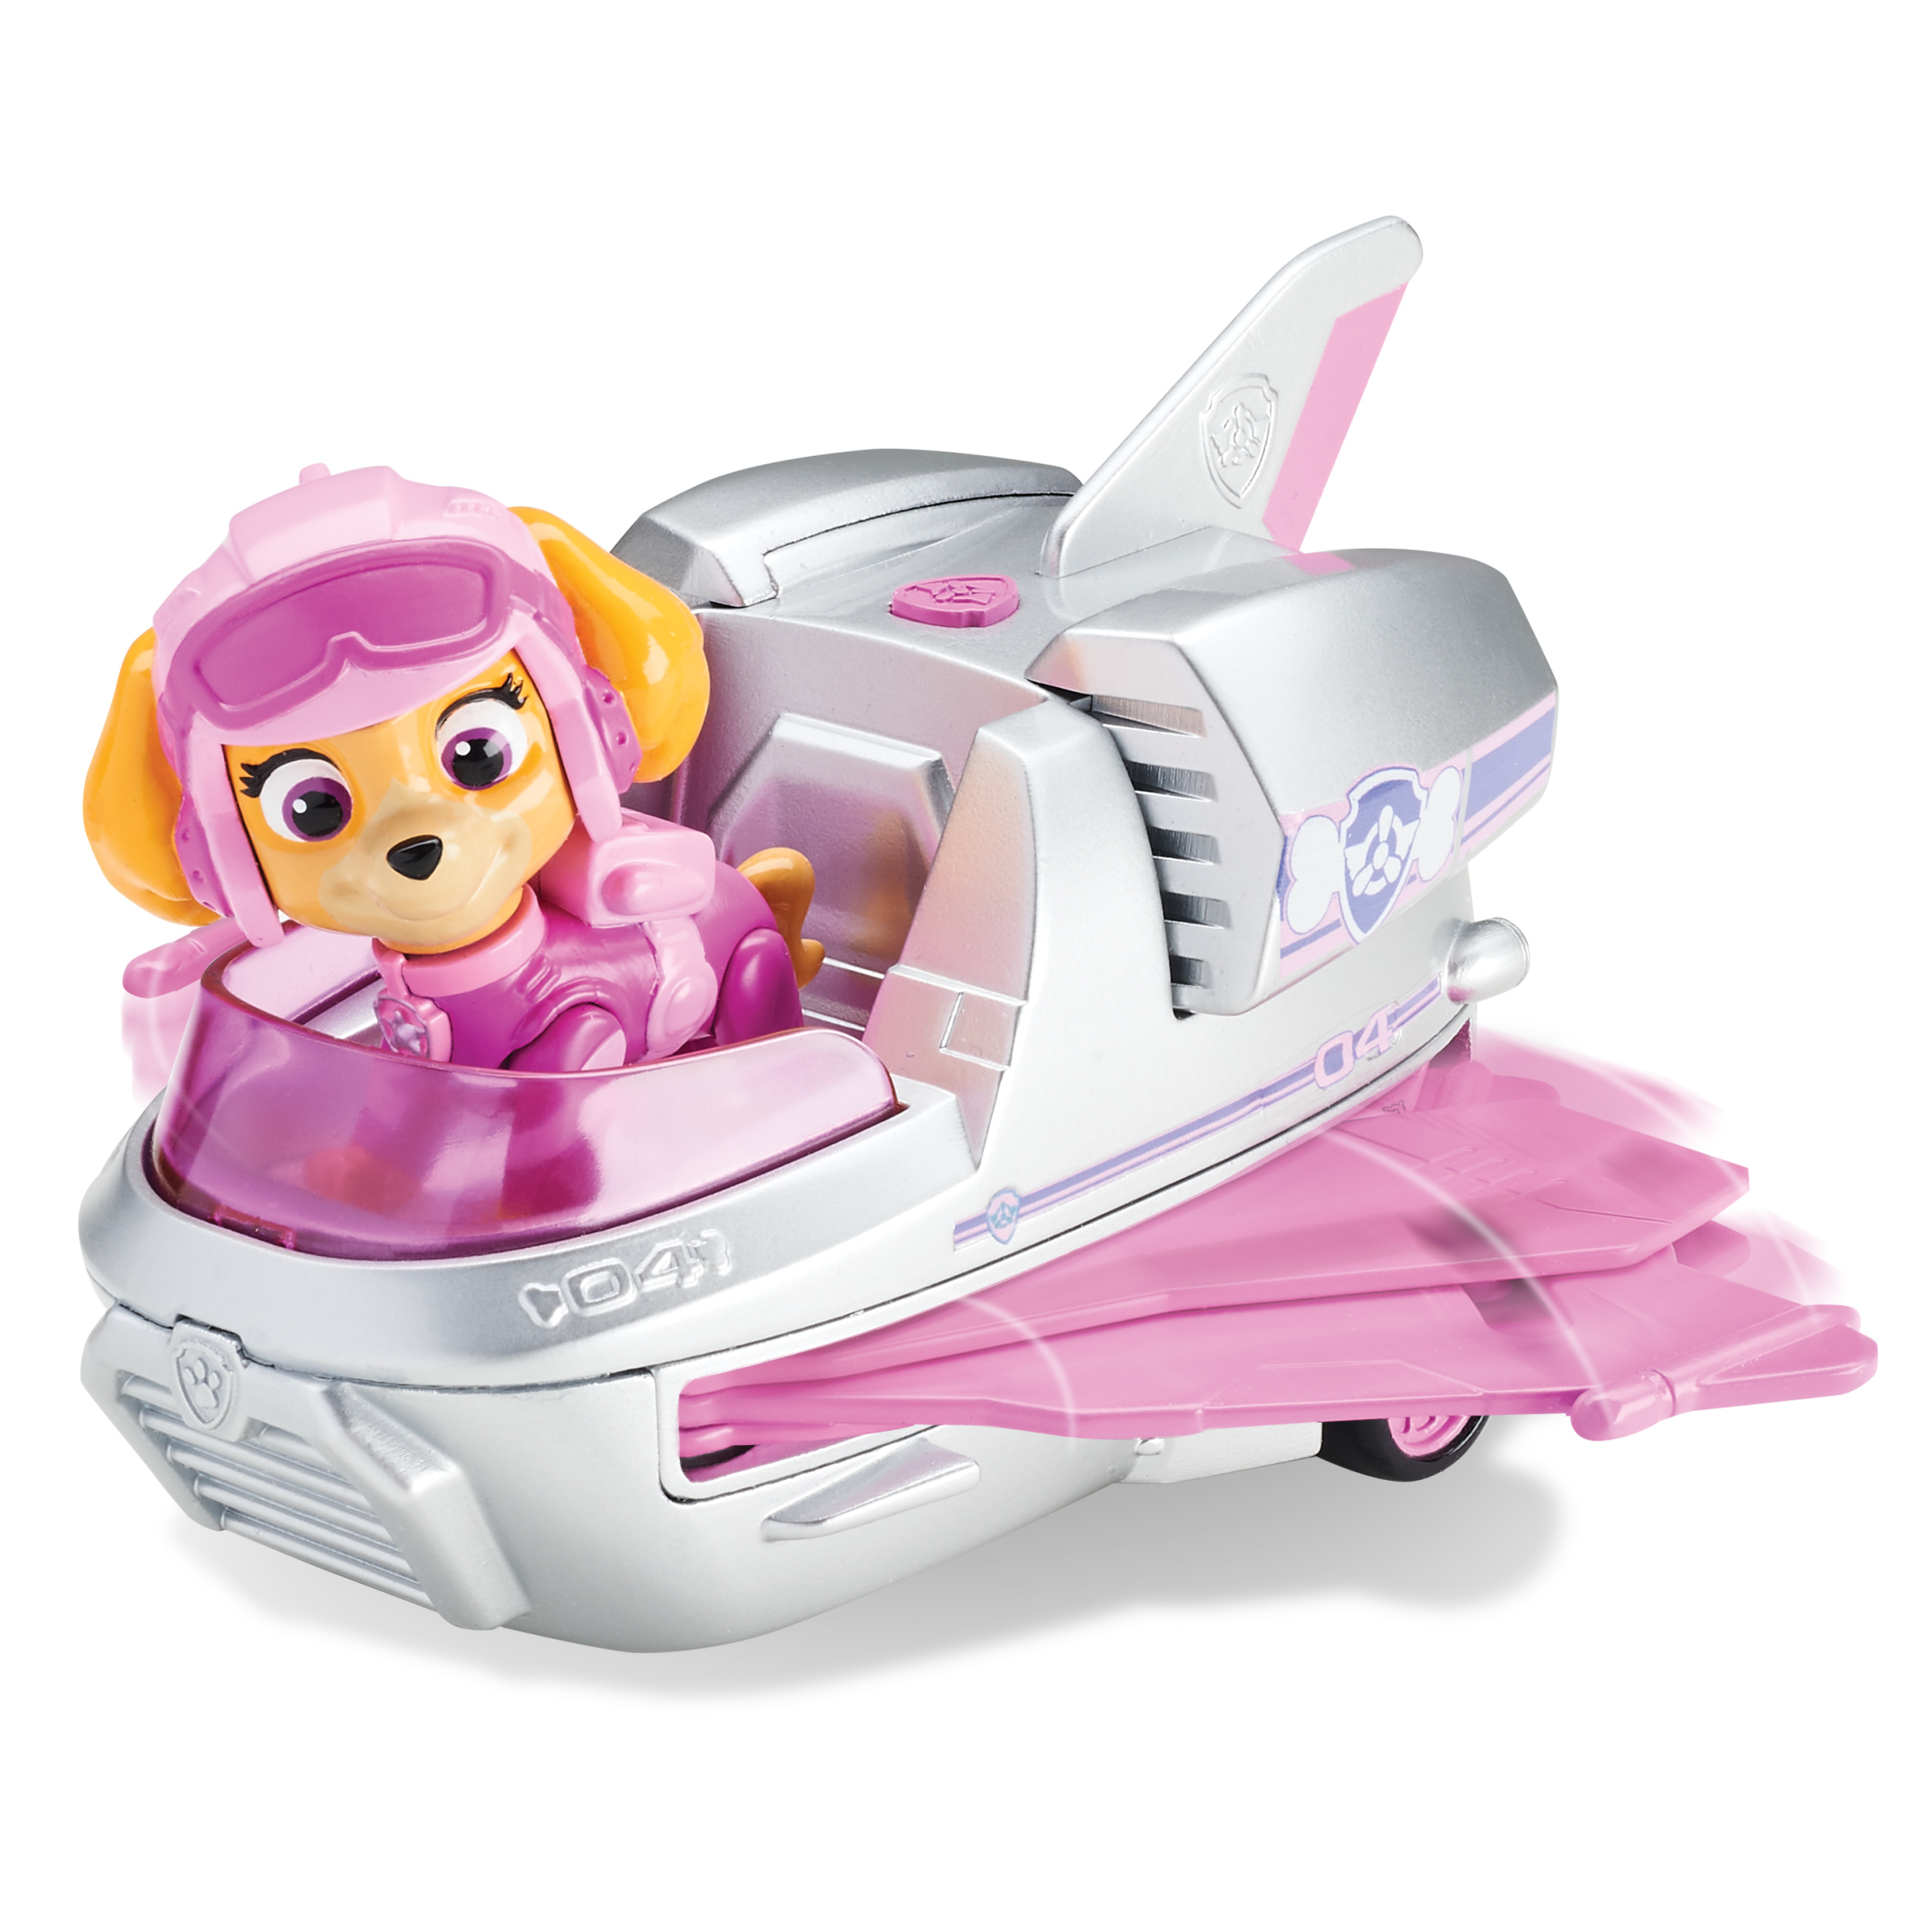 PAW Patrol Skye’s Rescue Jet with Extendable Wings Play Vehicle - image 4 of 5